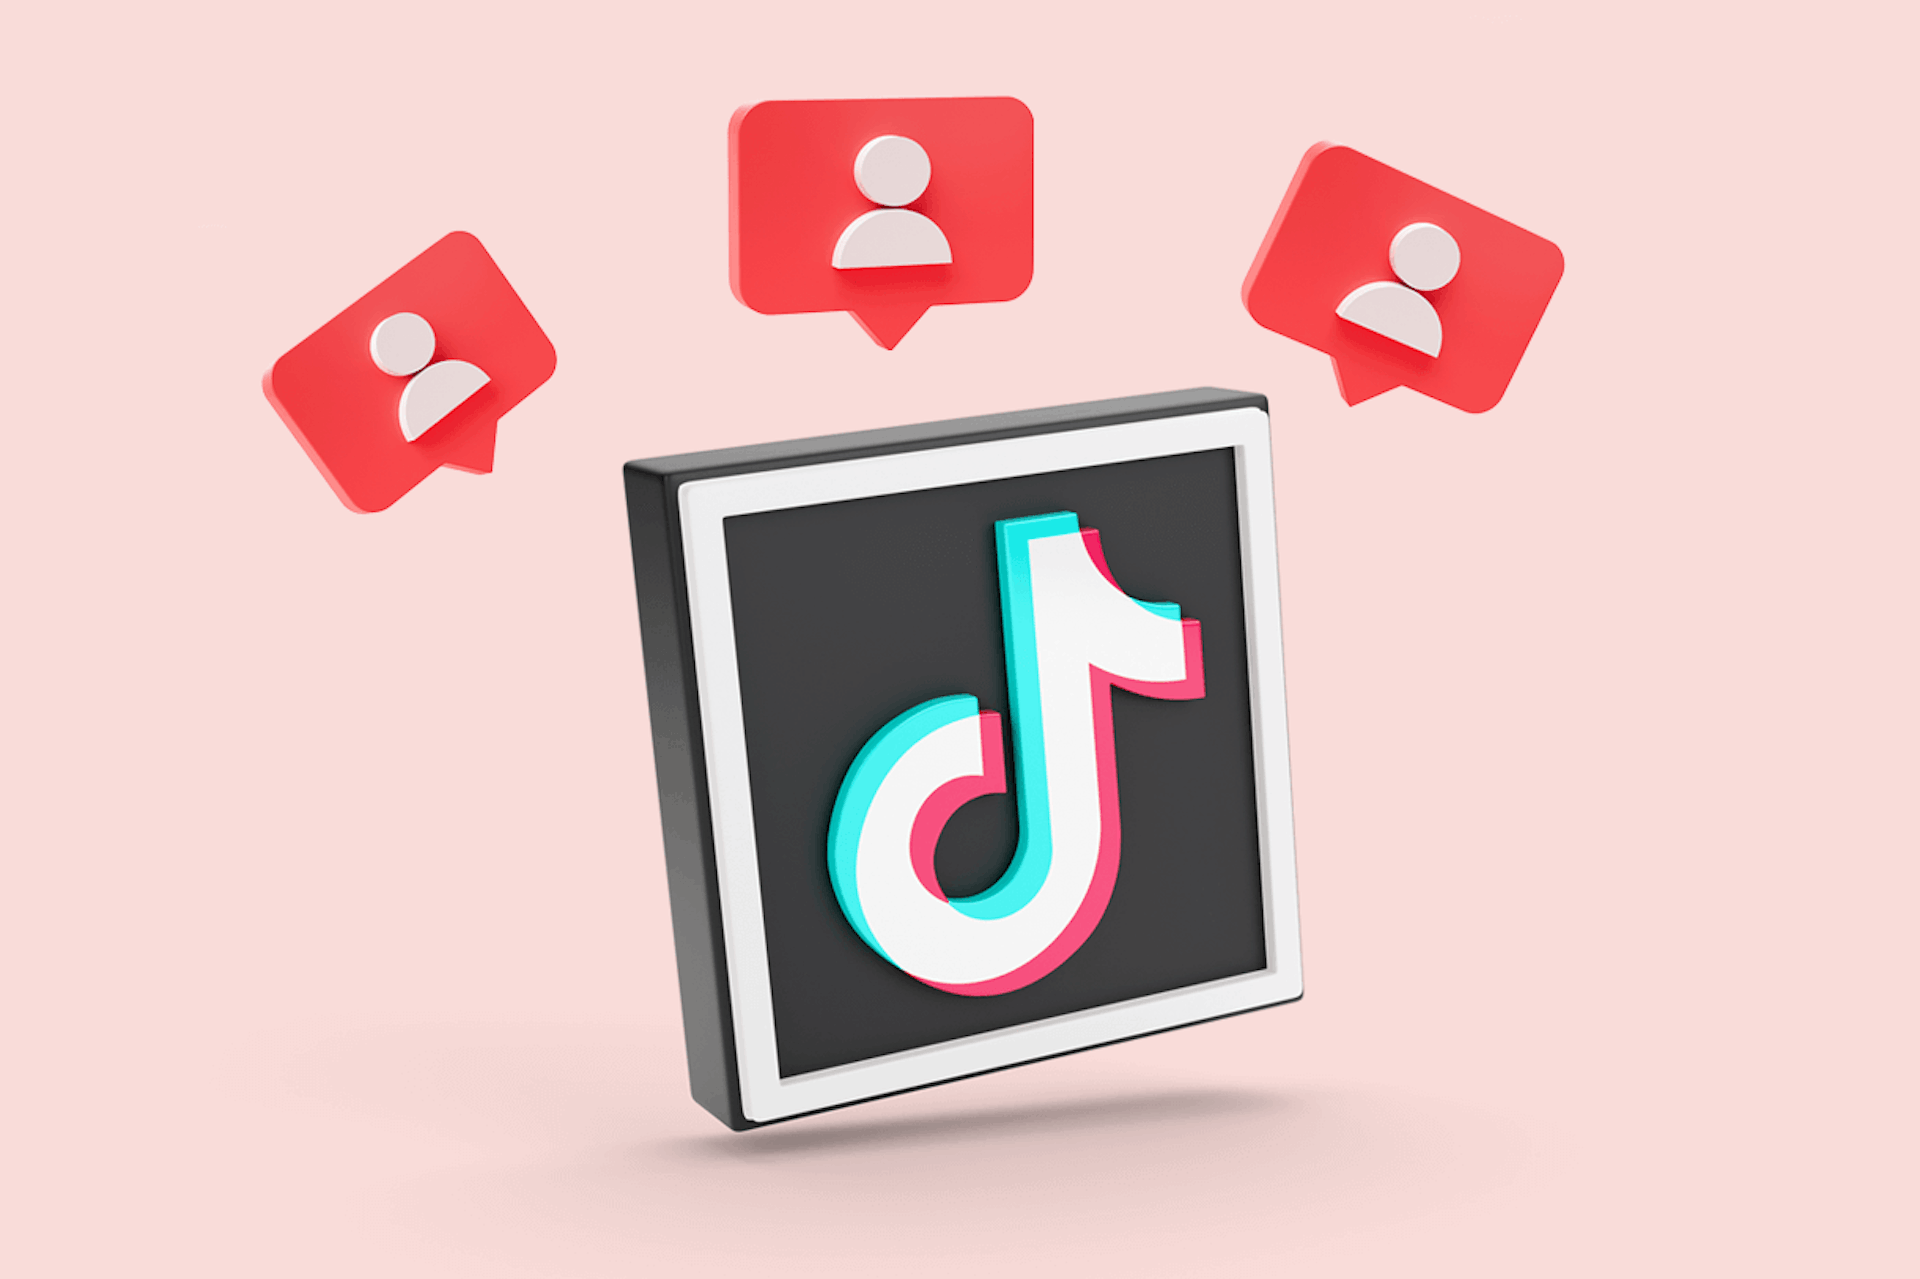 Illustration of a TikTok logo in a black and white box with three follower icons on top, on a pale pink background. The top 10 most followed TikTok accounts blog post.